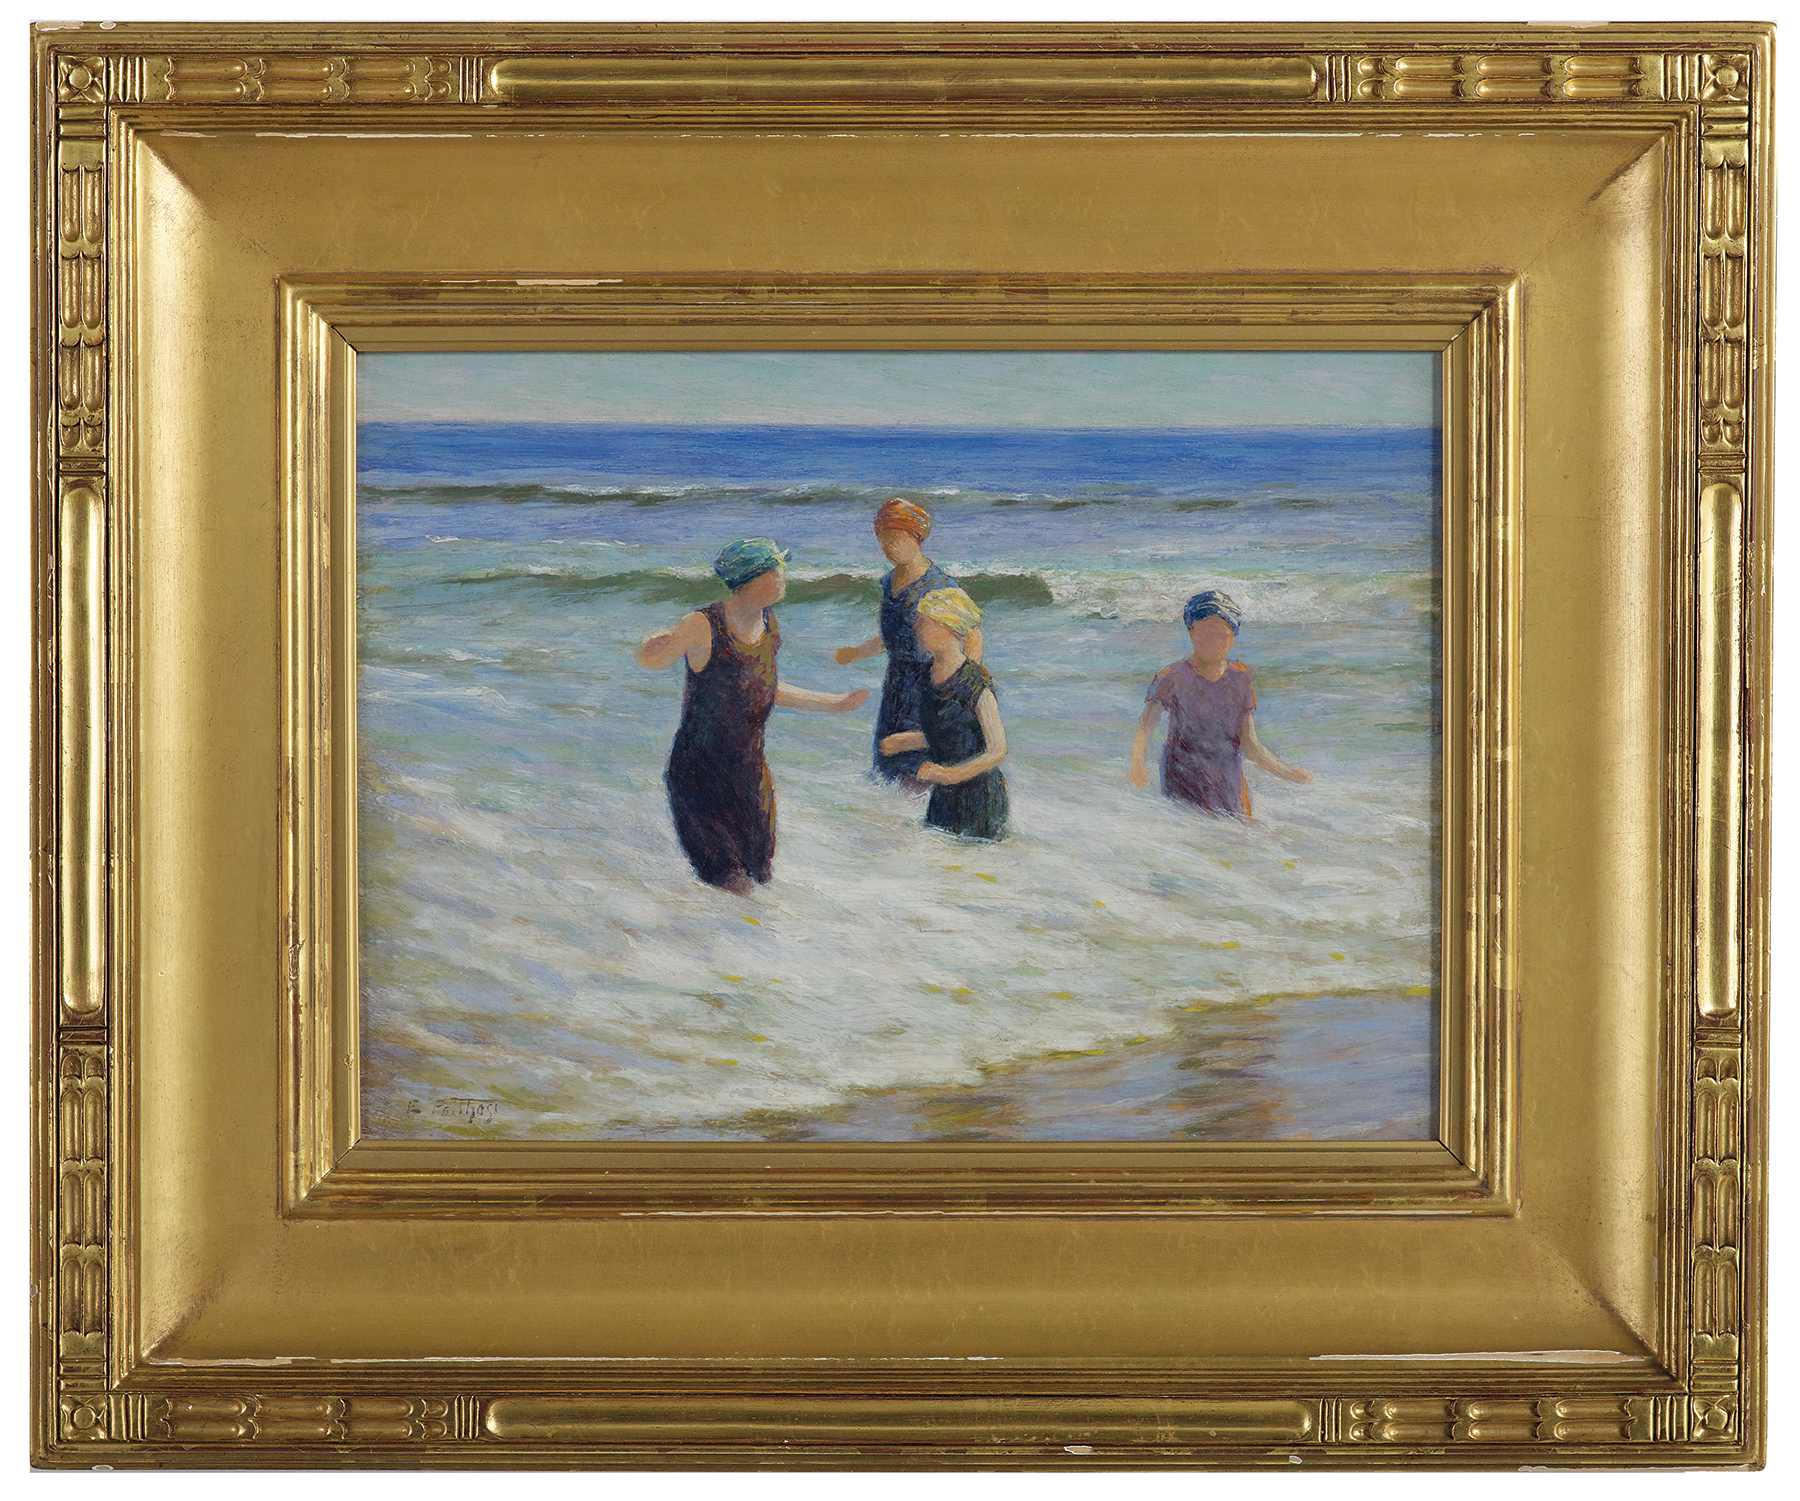 Bathers in the Surf